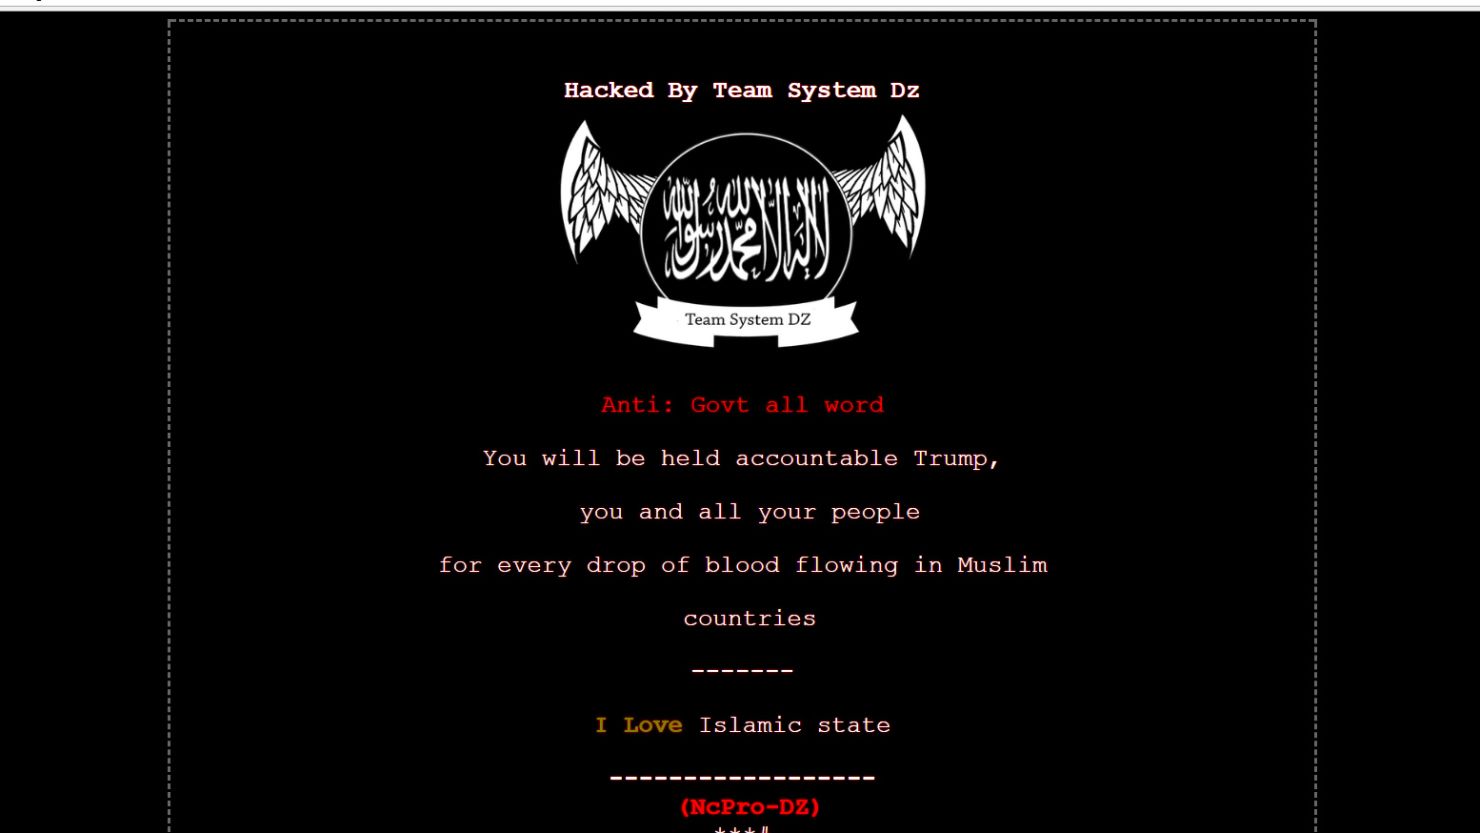 Ohio Gov. John Kasich's website was hacked on Sunday, June 25, and displayed what appeared to be pro-ISIS propaganda.